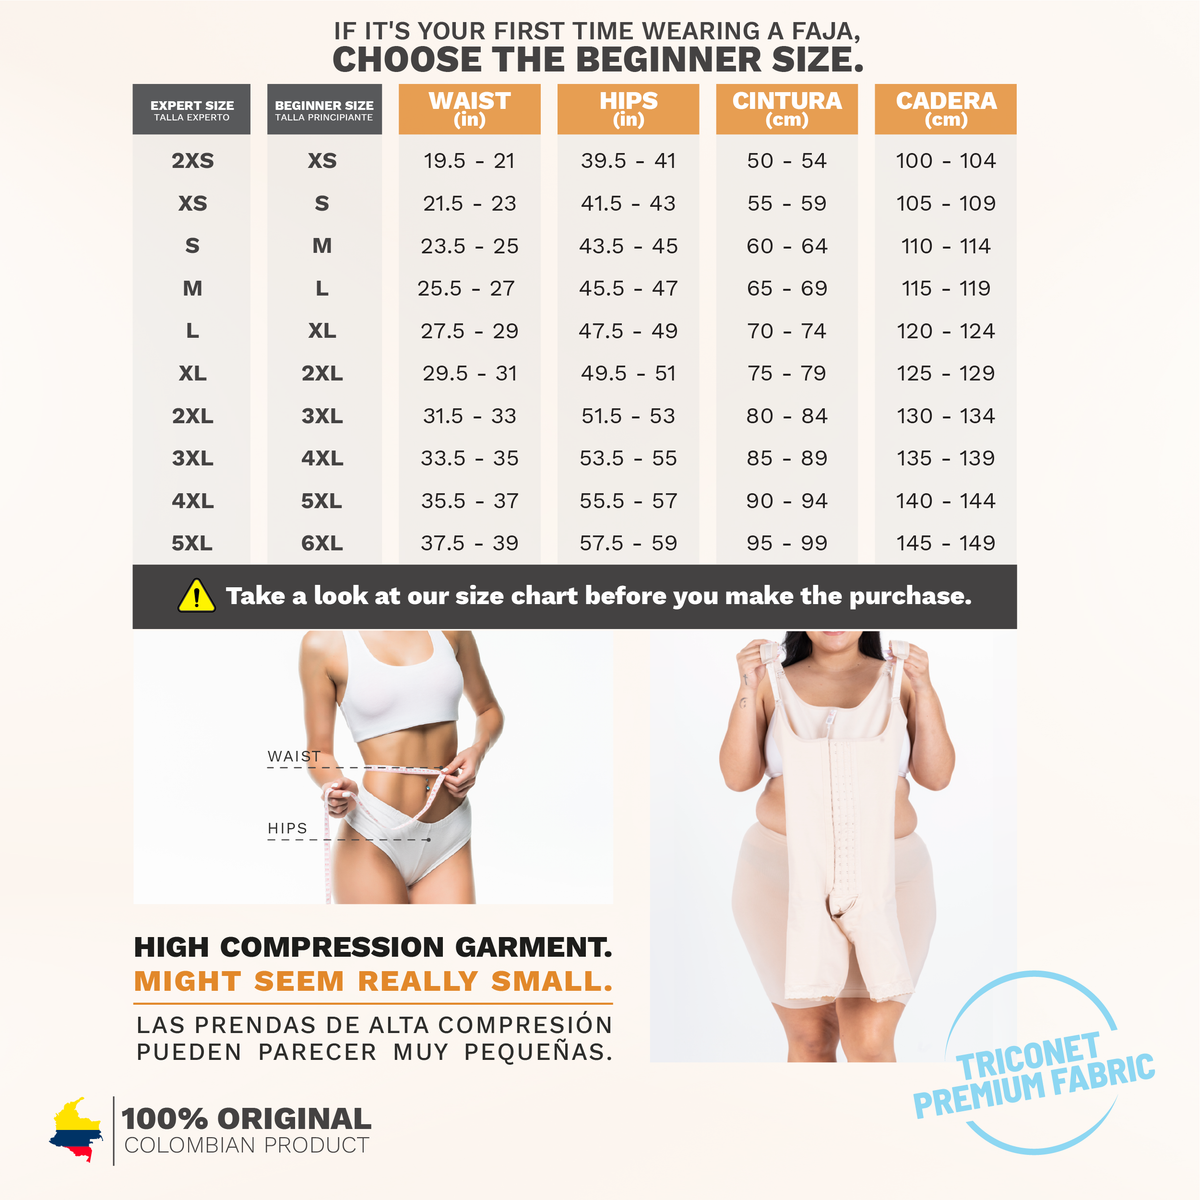 SONRYSE TR211Open Bust Bodysuit | Post Surgery Body Shapers | Stage 1 Faja